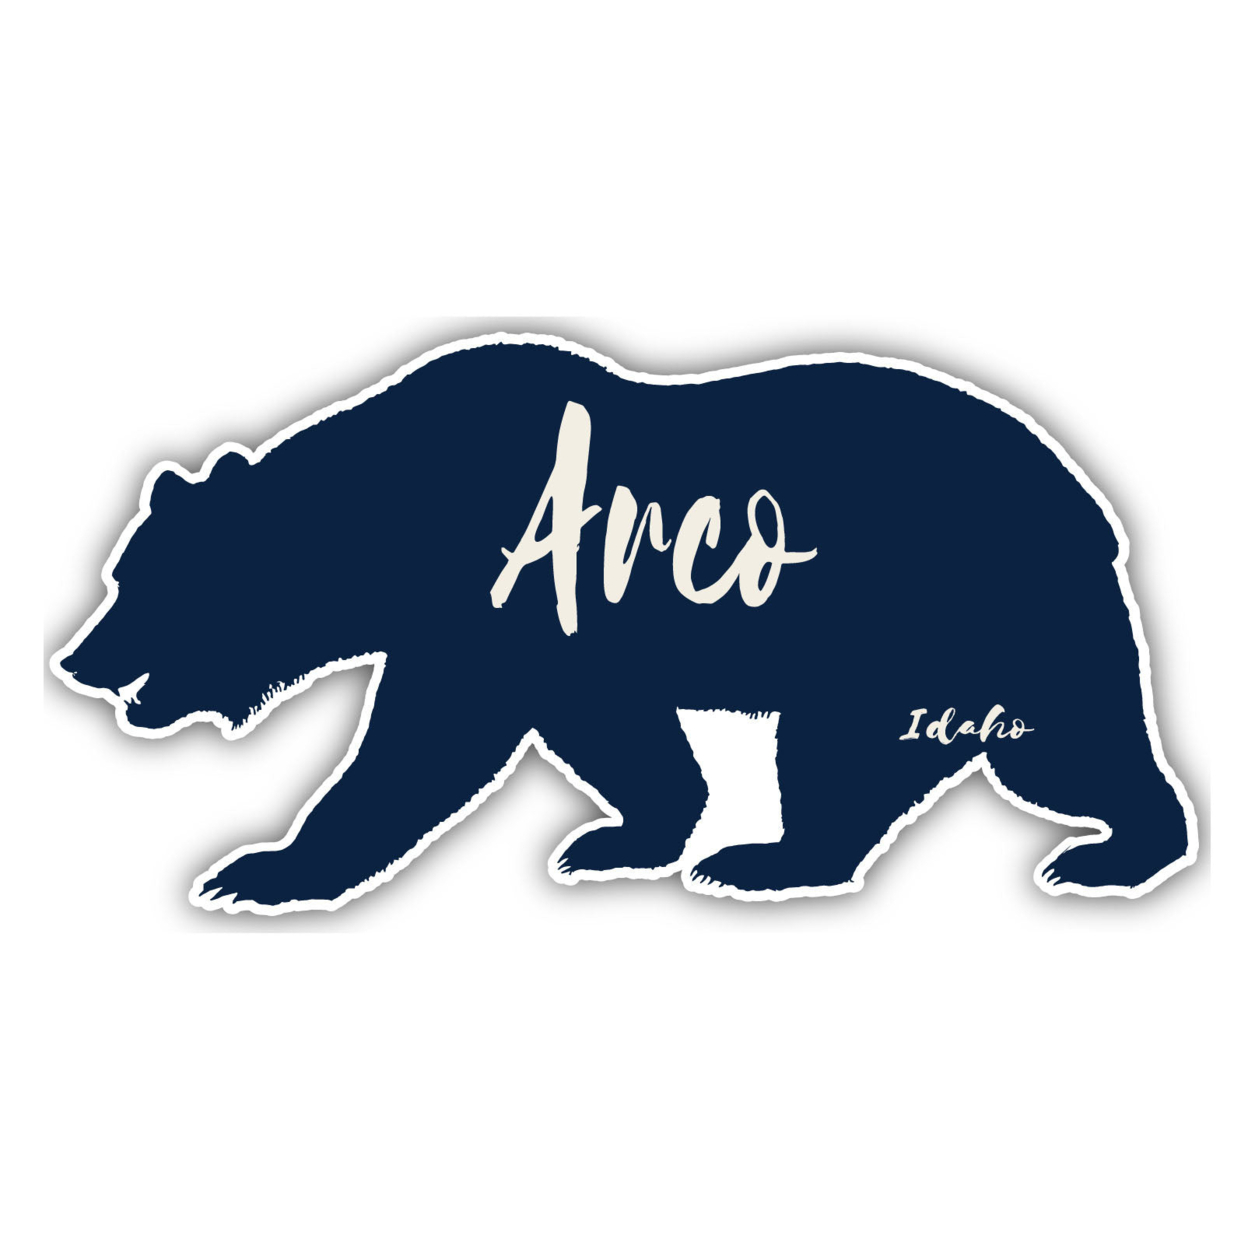 Arco Idaho Souvenir Decorative Stickers (Choose Theme And Size) - 4-Pack, 10-Inch, Great Outdoors